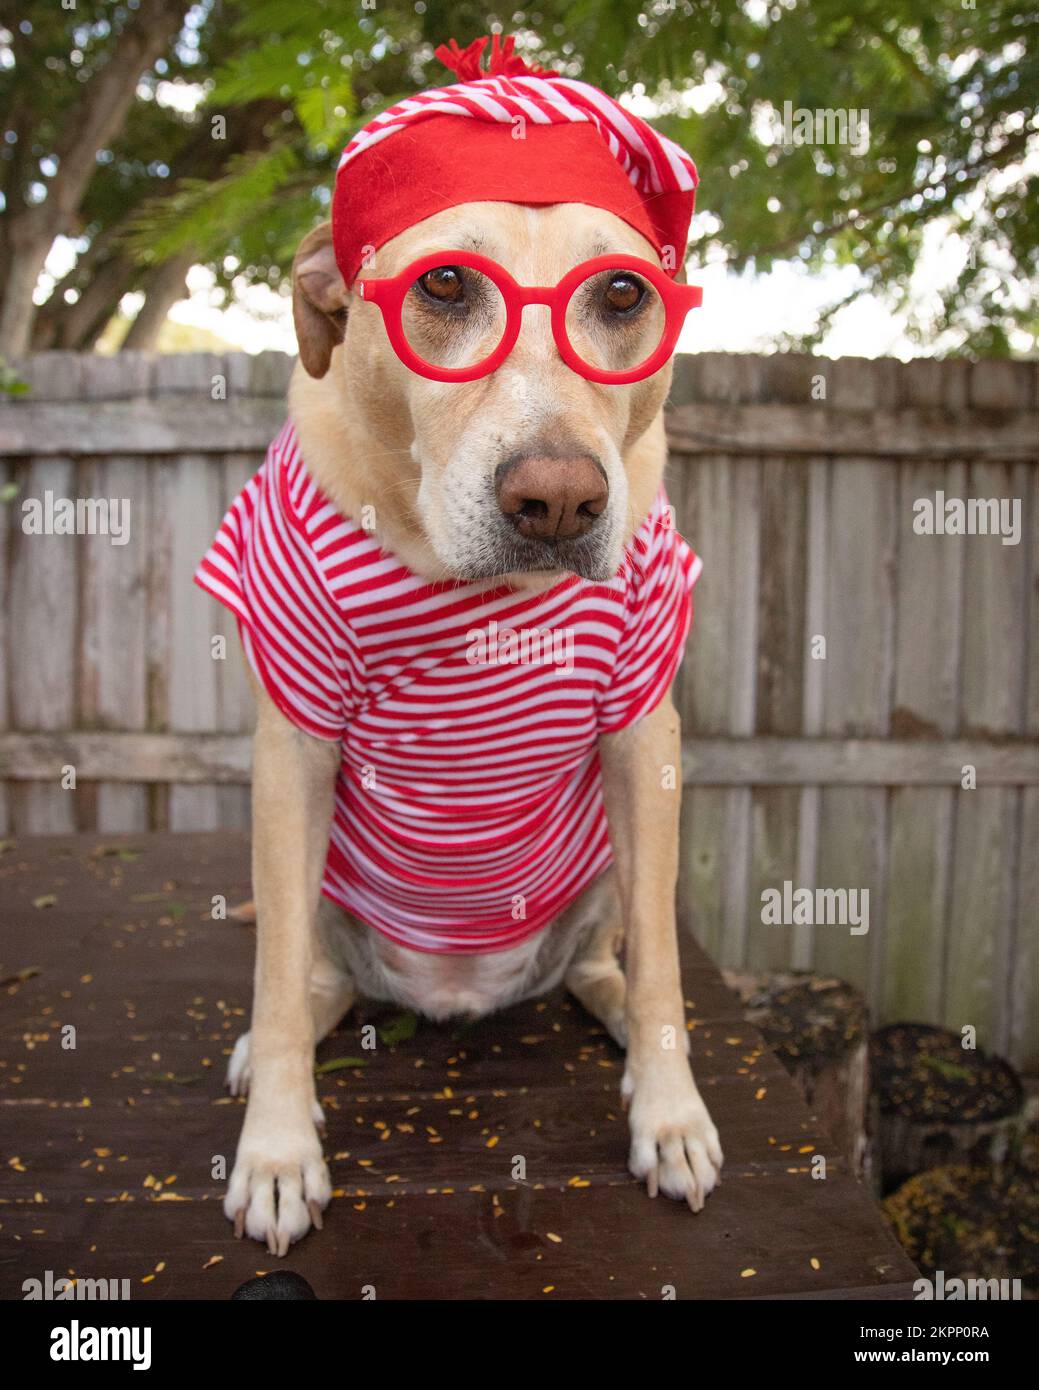 Close-up of a labrador retriever mix dog sitting in a garden wearing pet clothing and red glasses Stock Photo